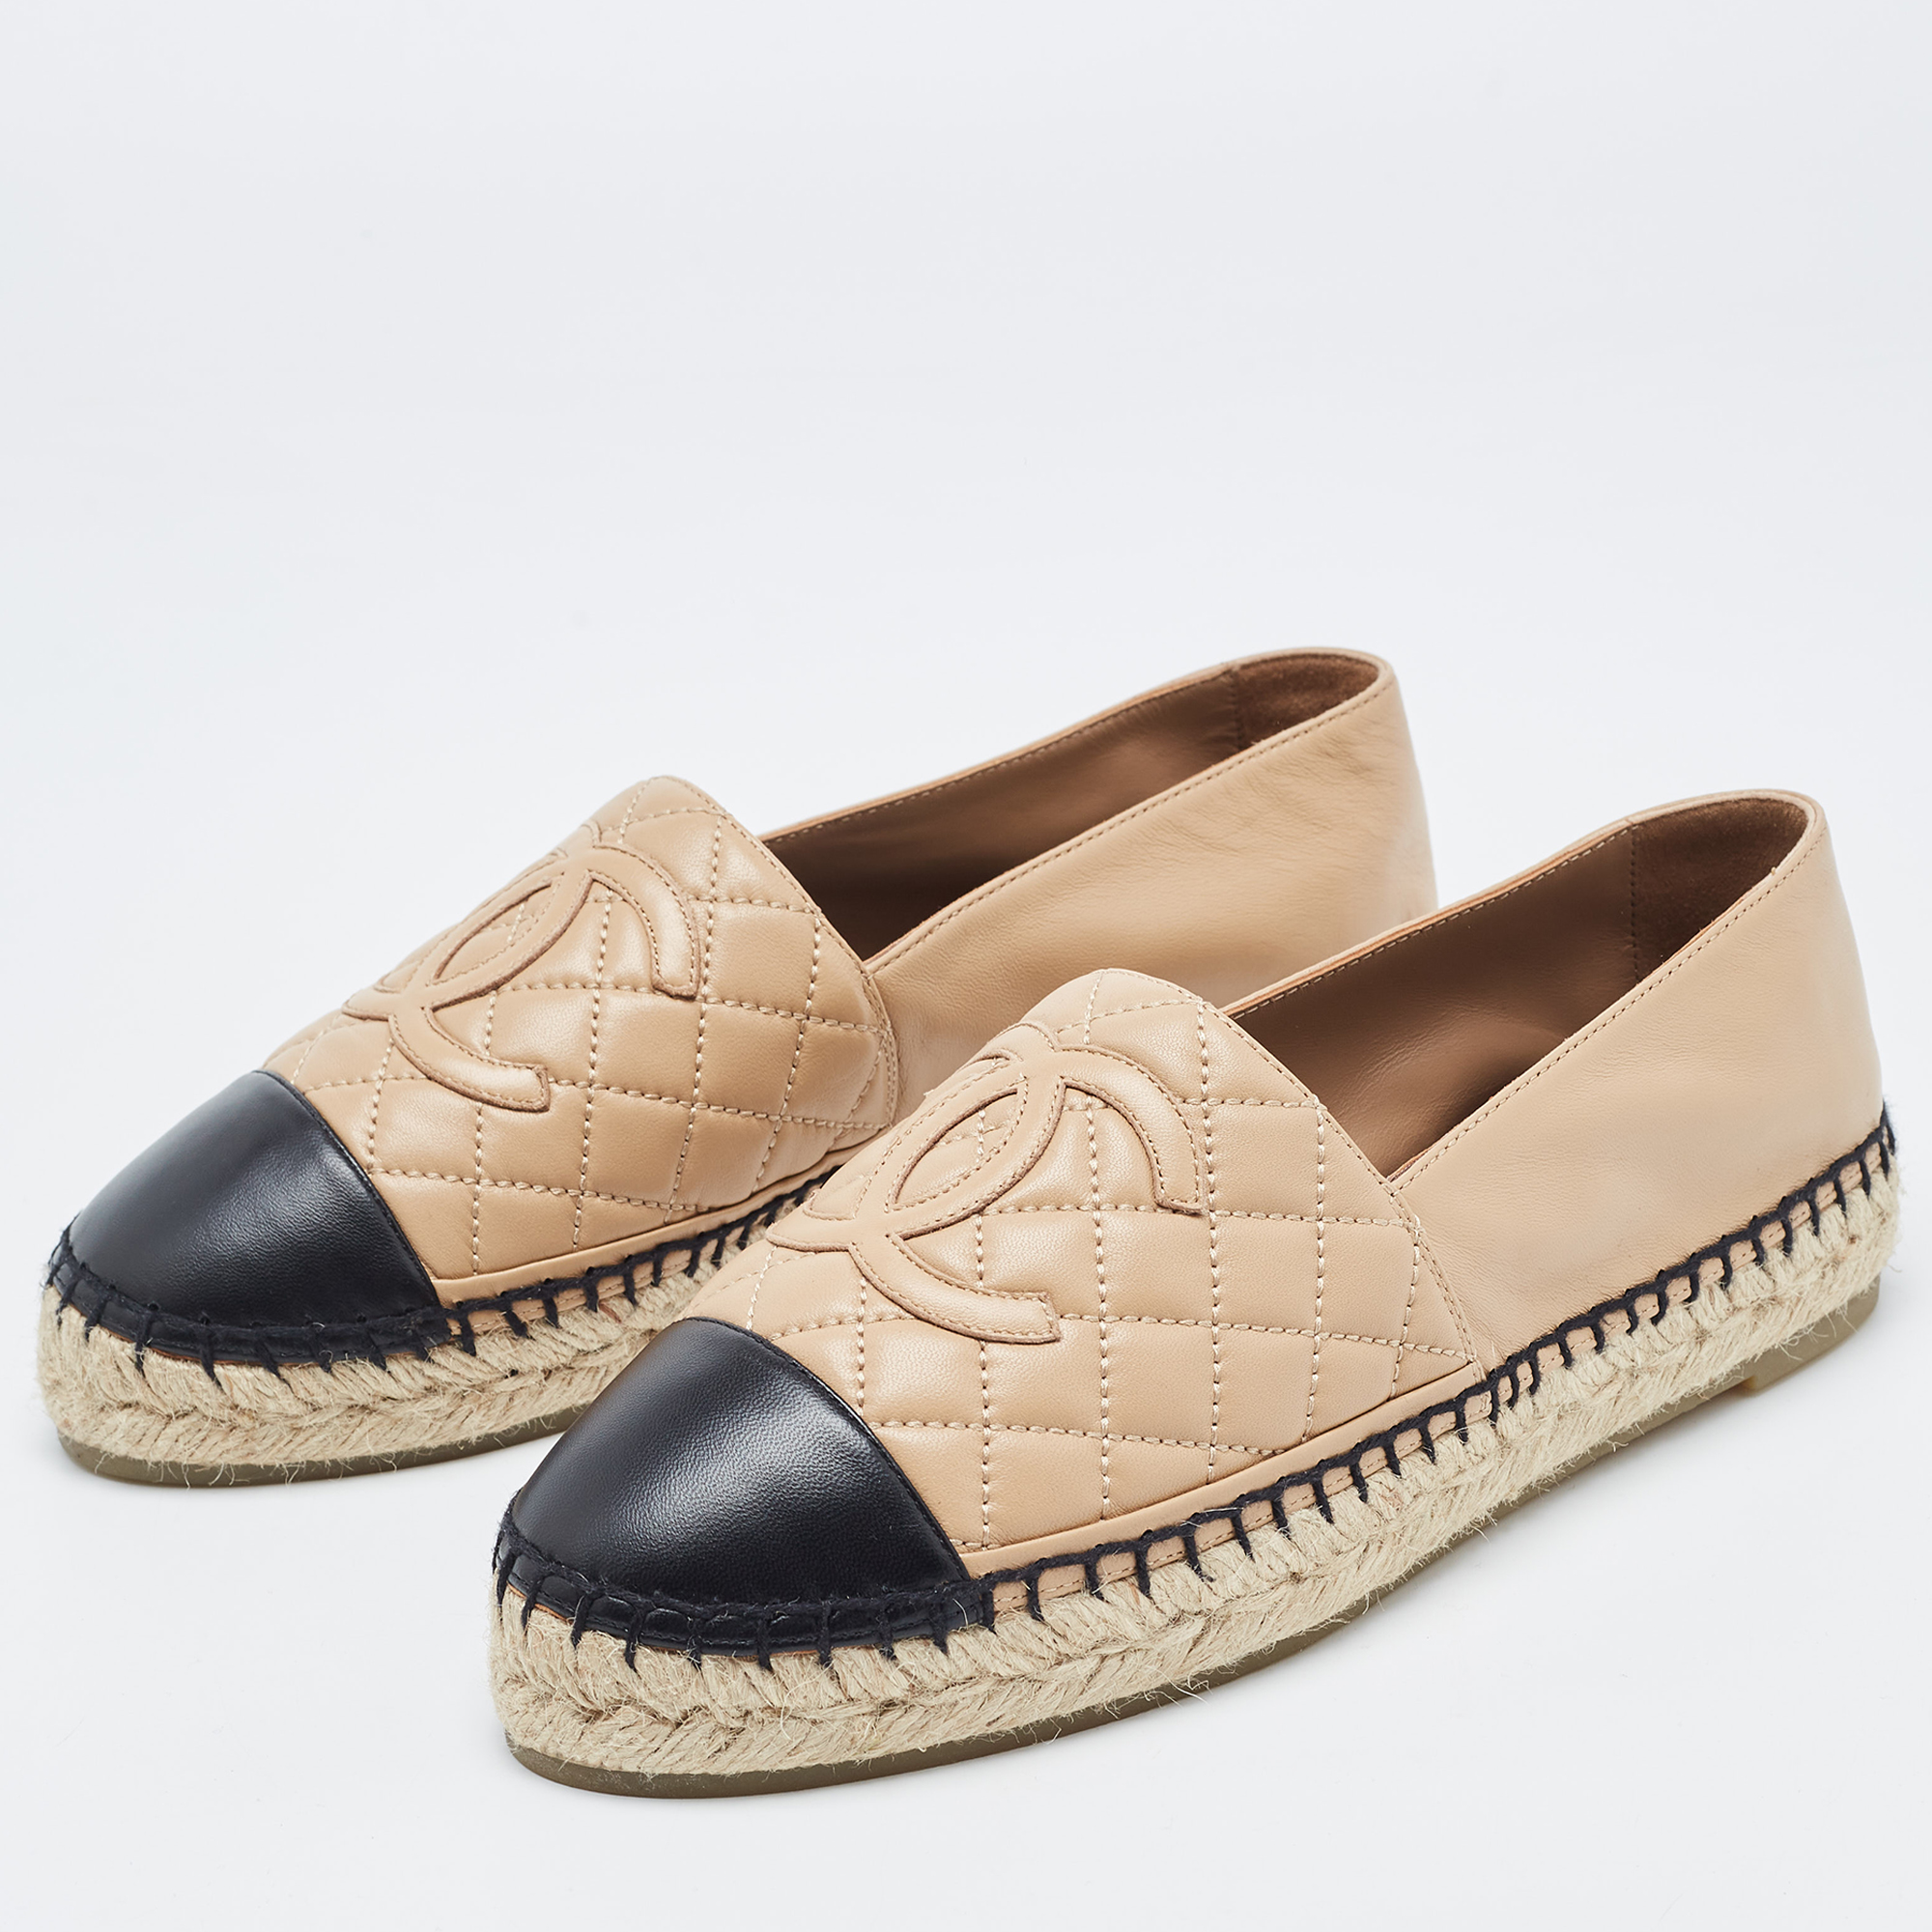 

Chanel Beige/Black Leather CC Quilted Espadrilles Flats Size